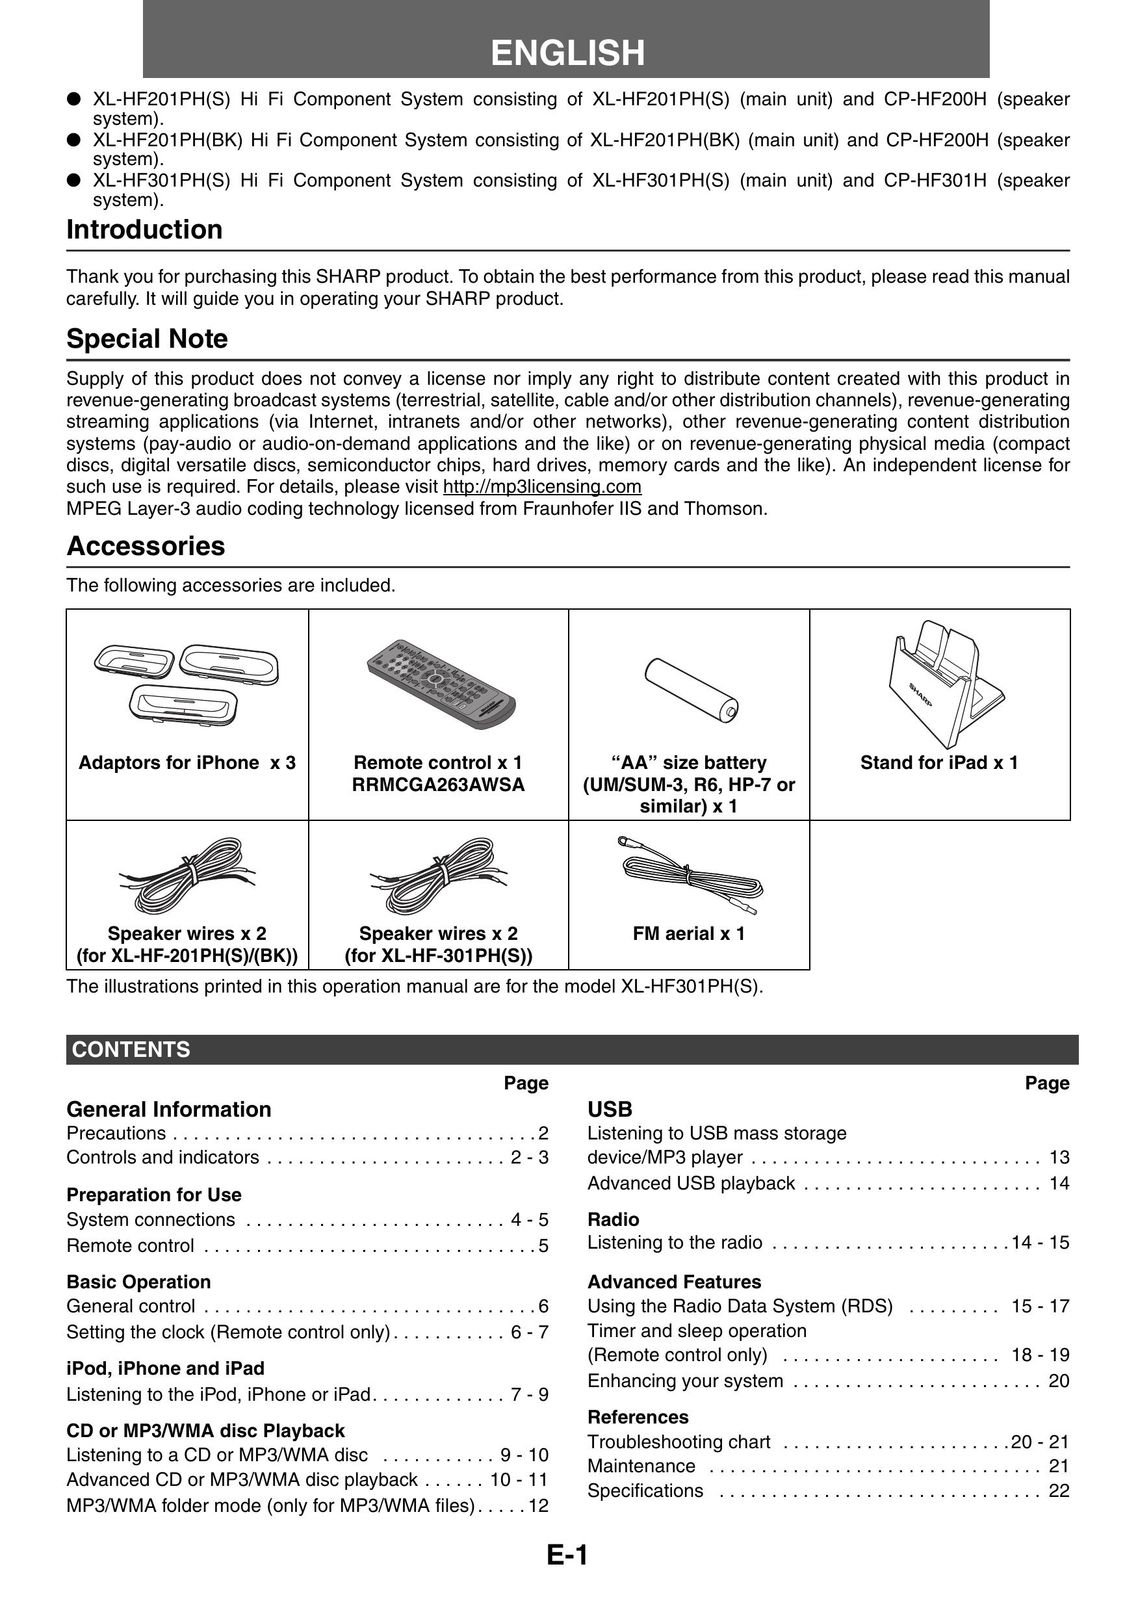 Sharp CP-HF200H Stereo System User Manual